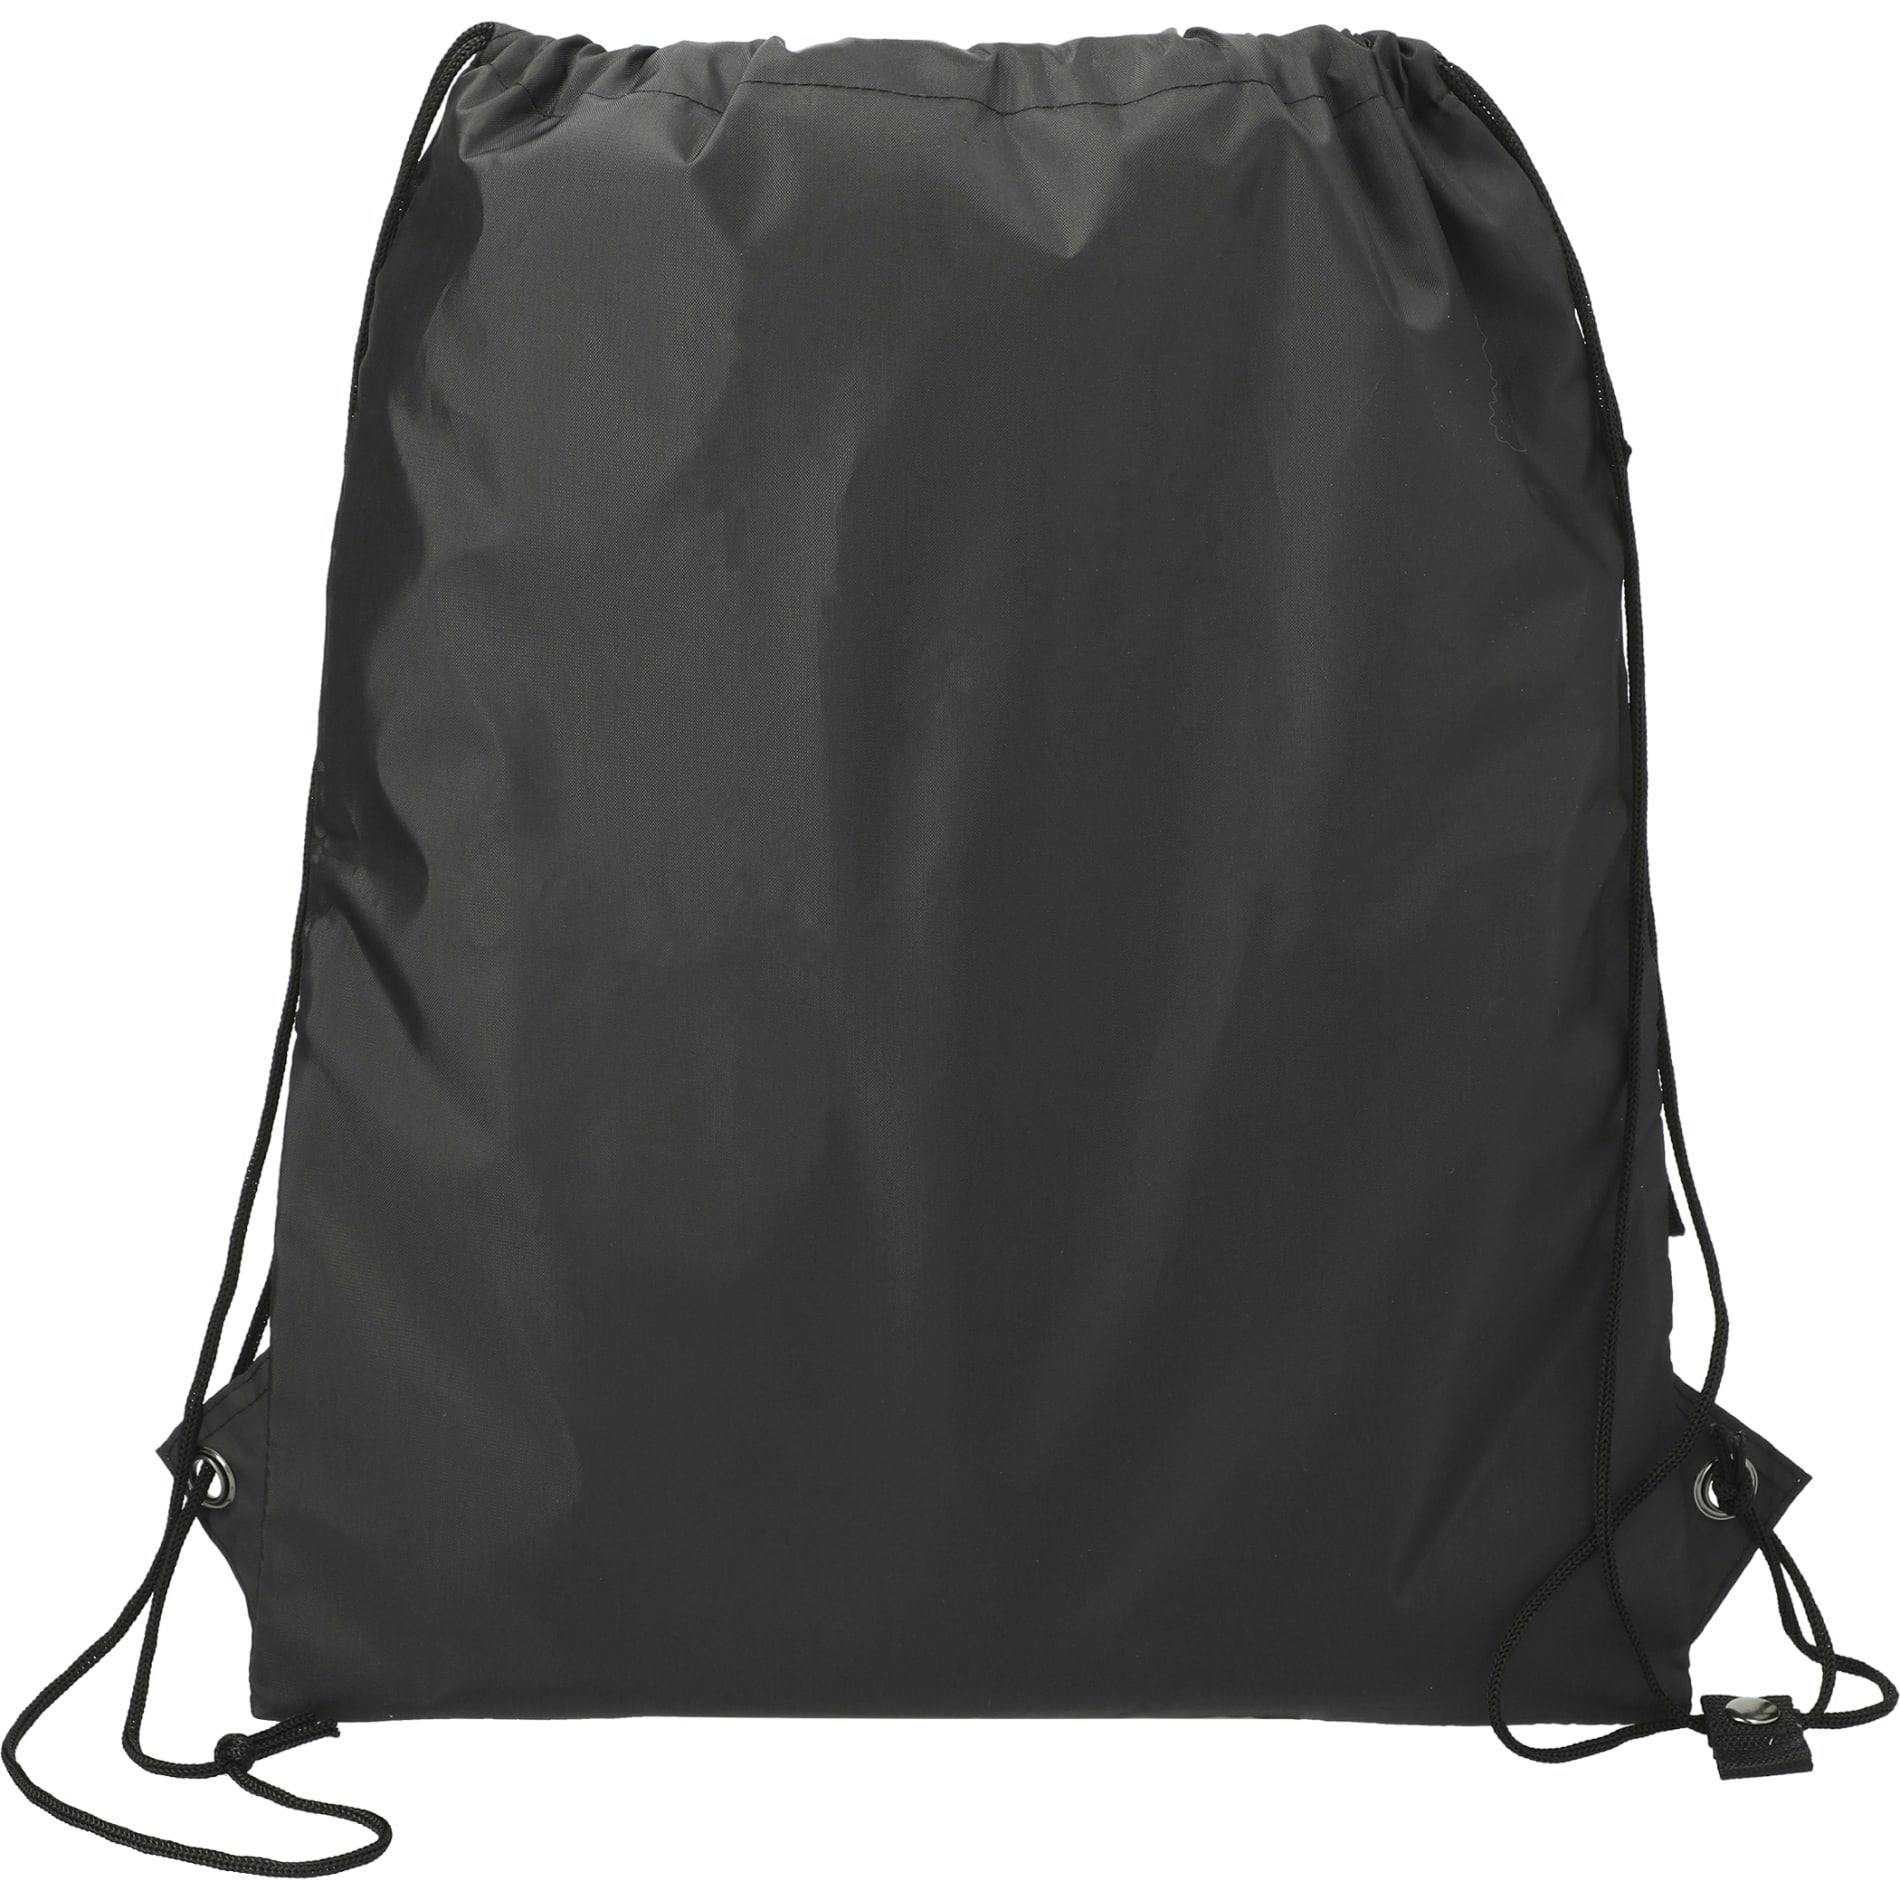 Adventure Insulated Drawstring - additional Image 3